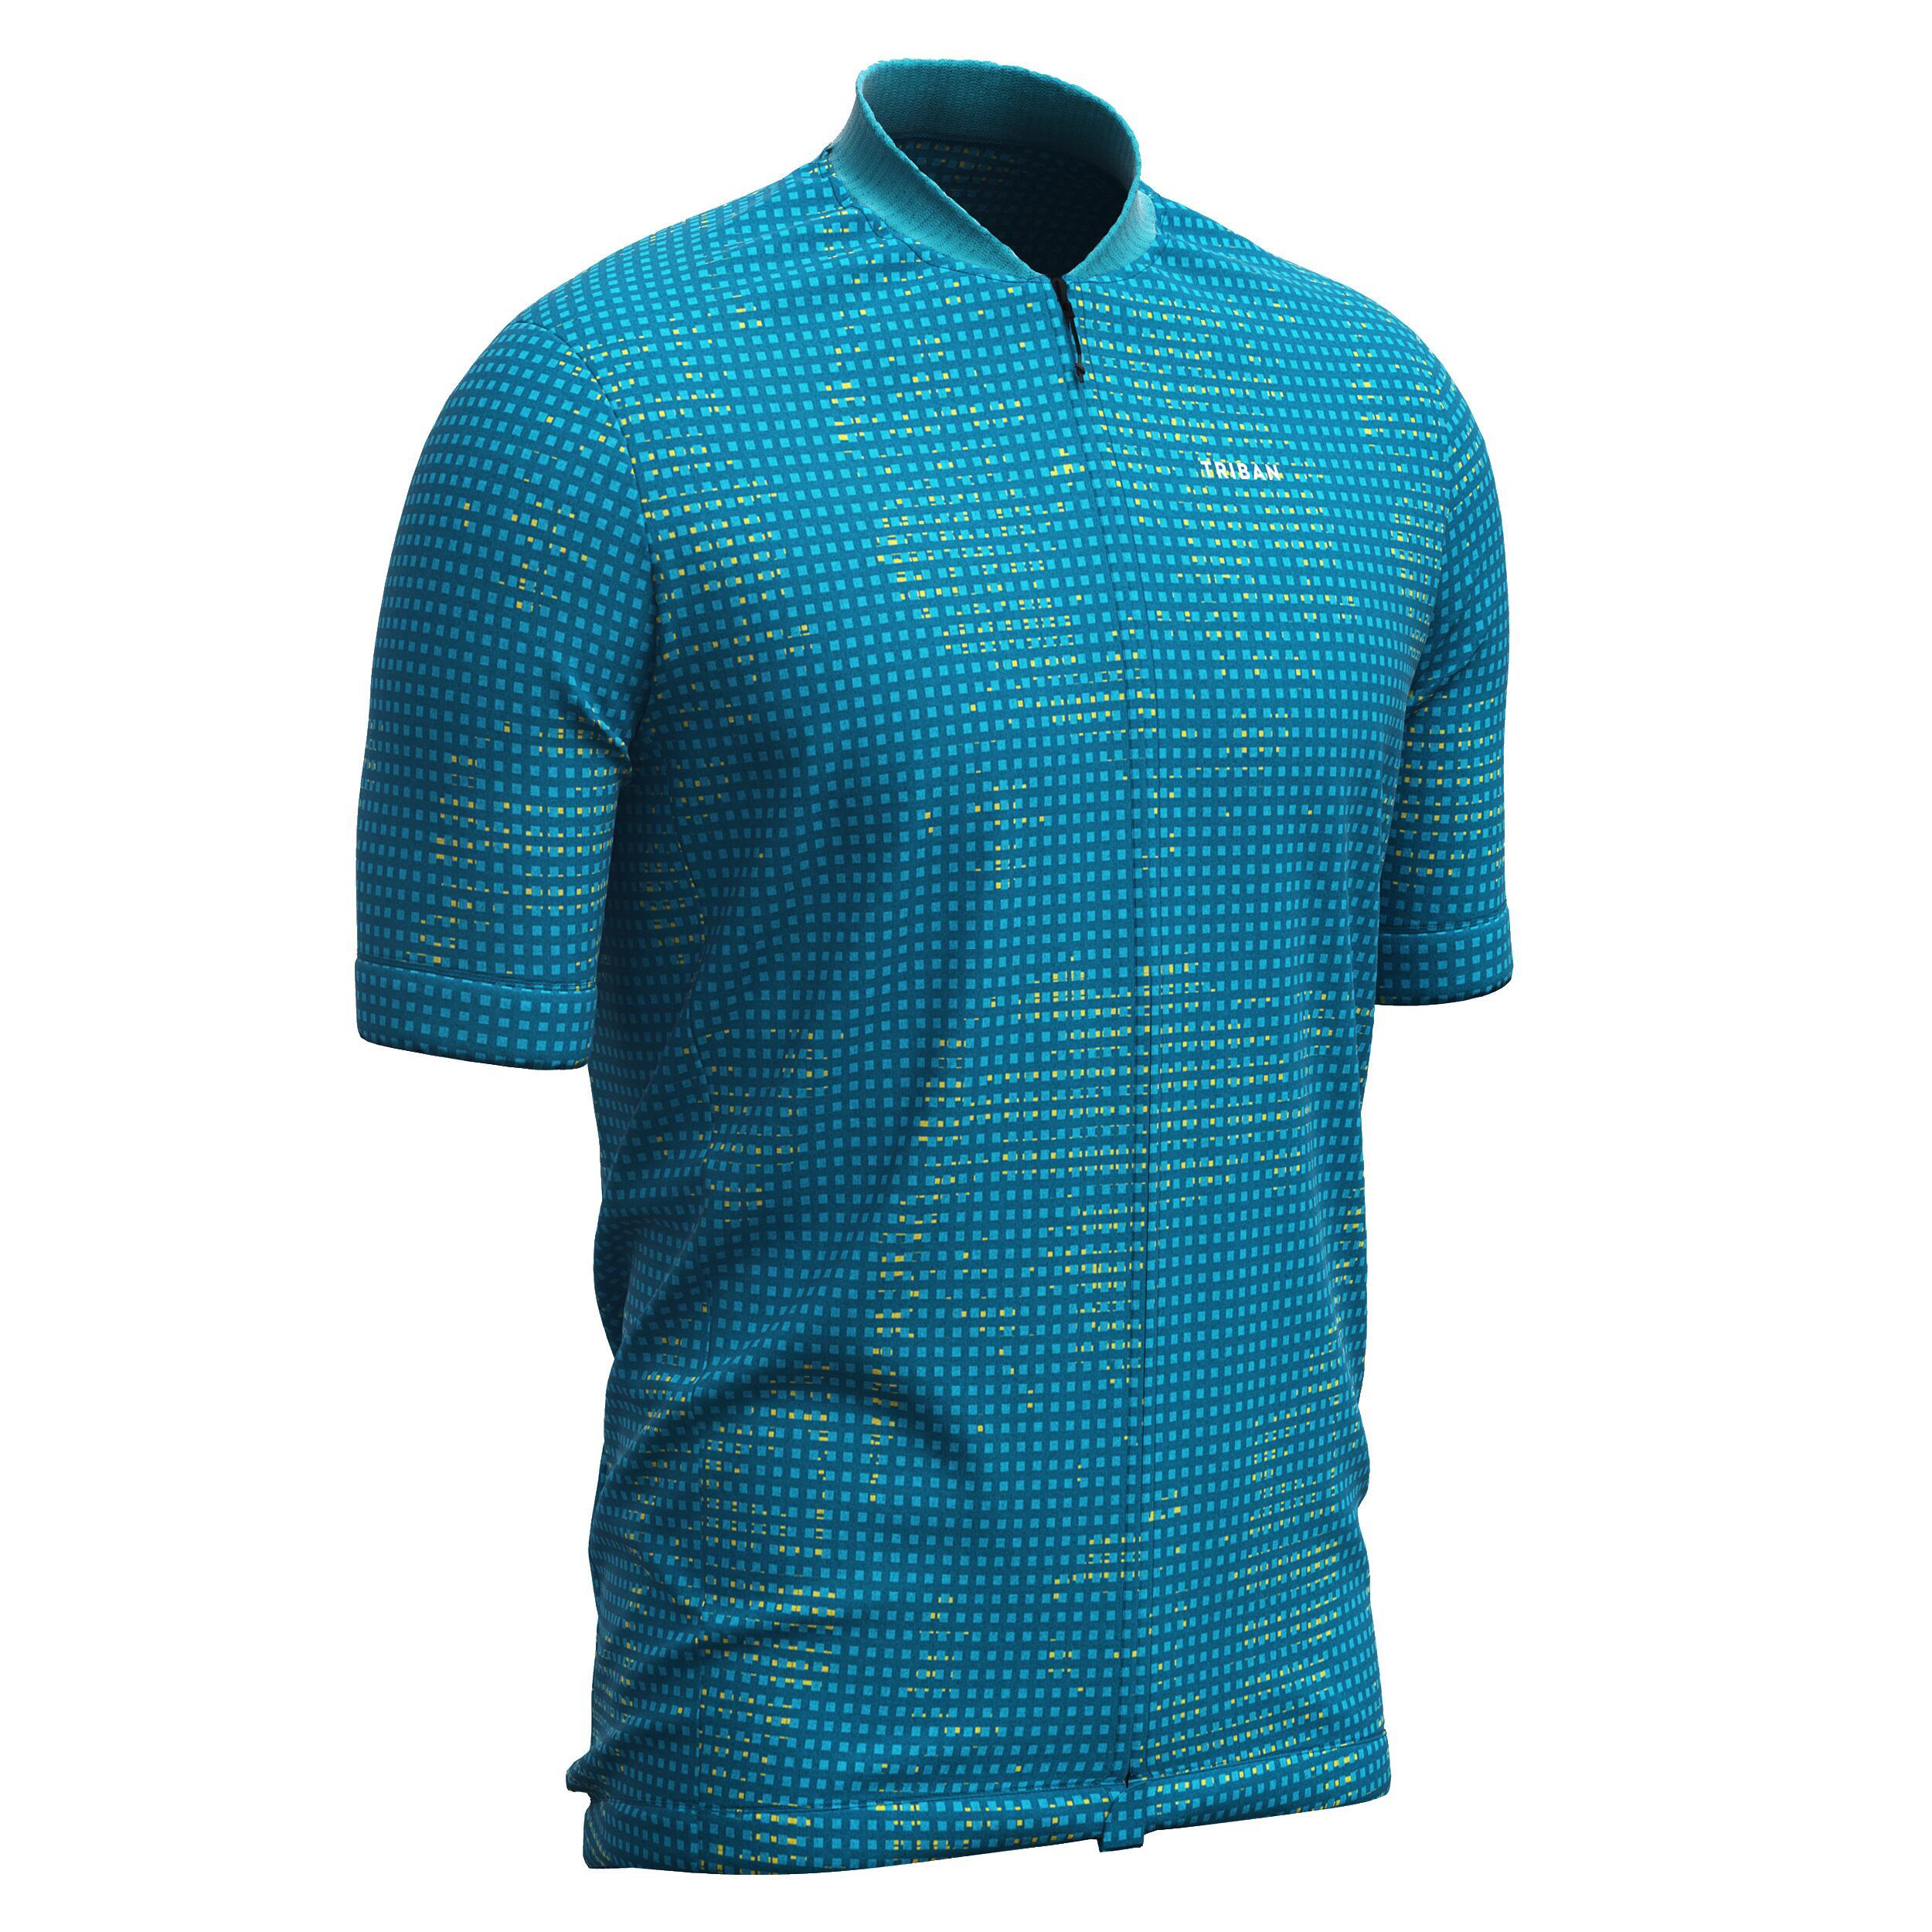 VAN RYSEL Men's Short-Sleeved Road Cycling Summer Jersey RC100 - Turquoise